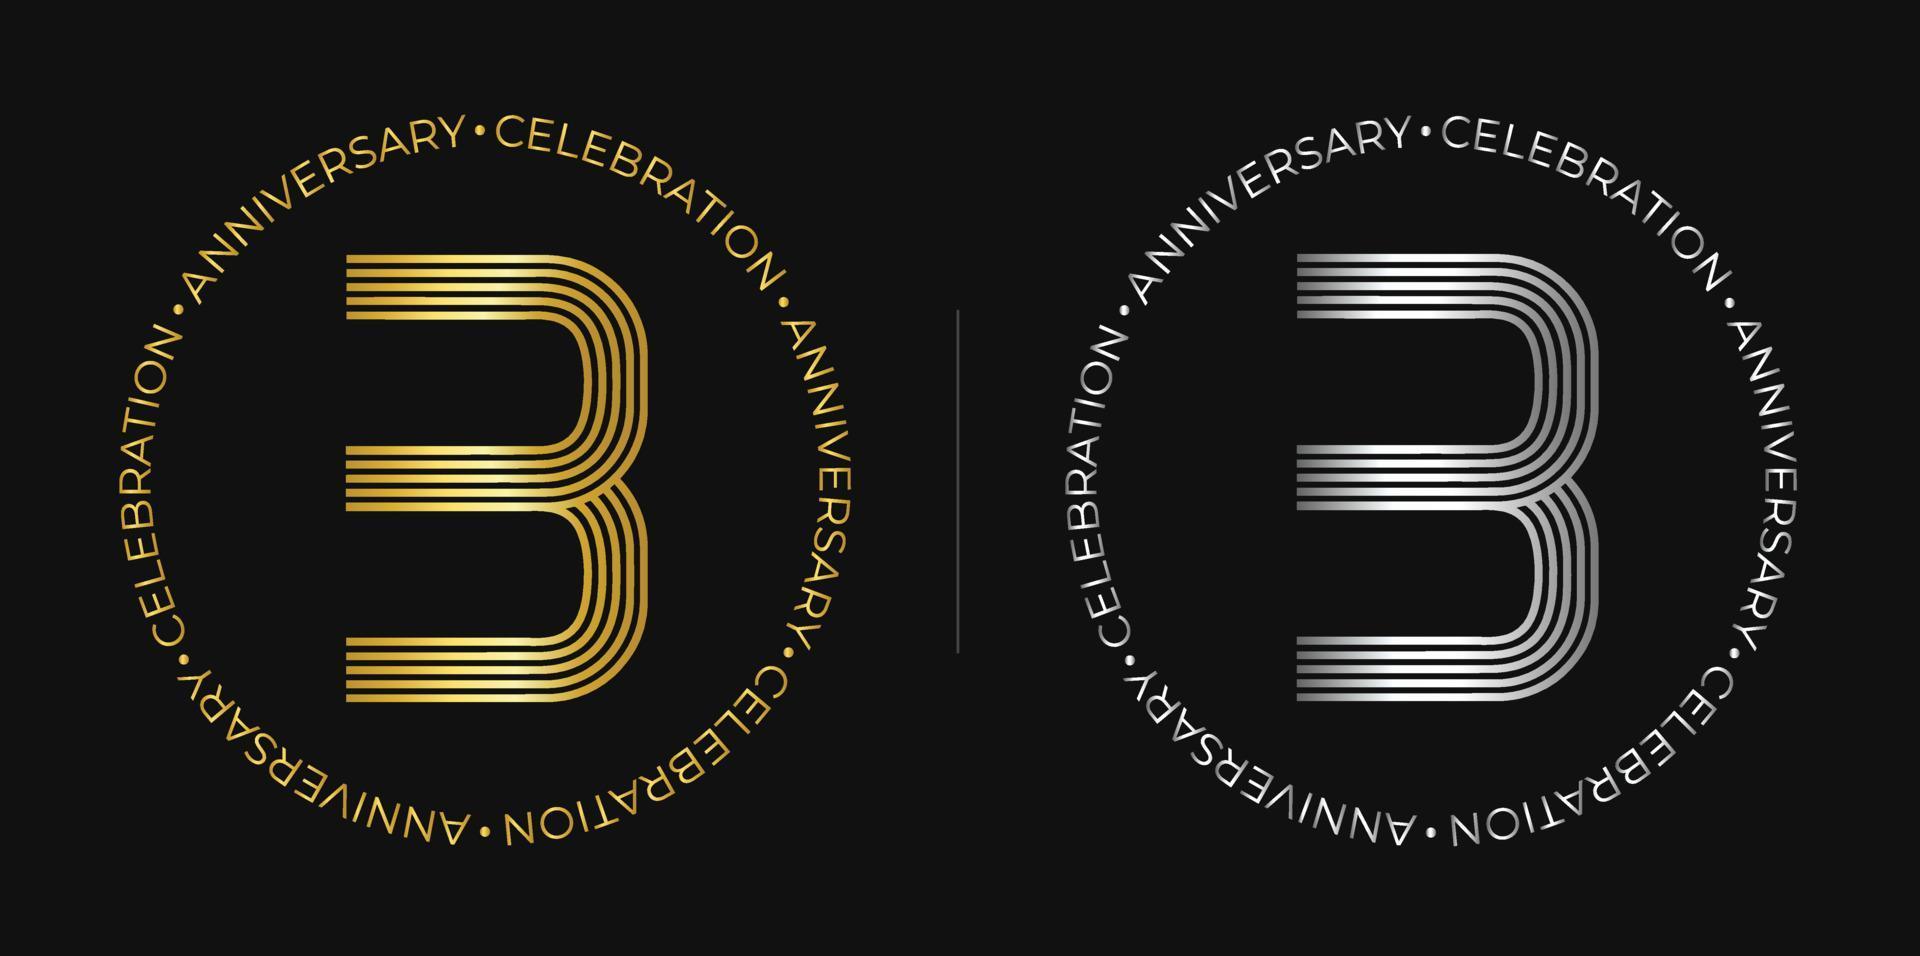 3rd birthday.Three years anniversary celebration banner in golden and silver colors. Circular logo with original number design in elegant lines. vector